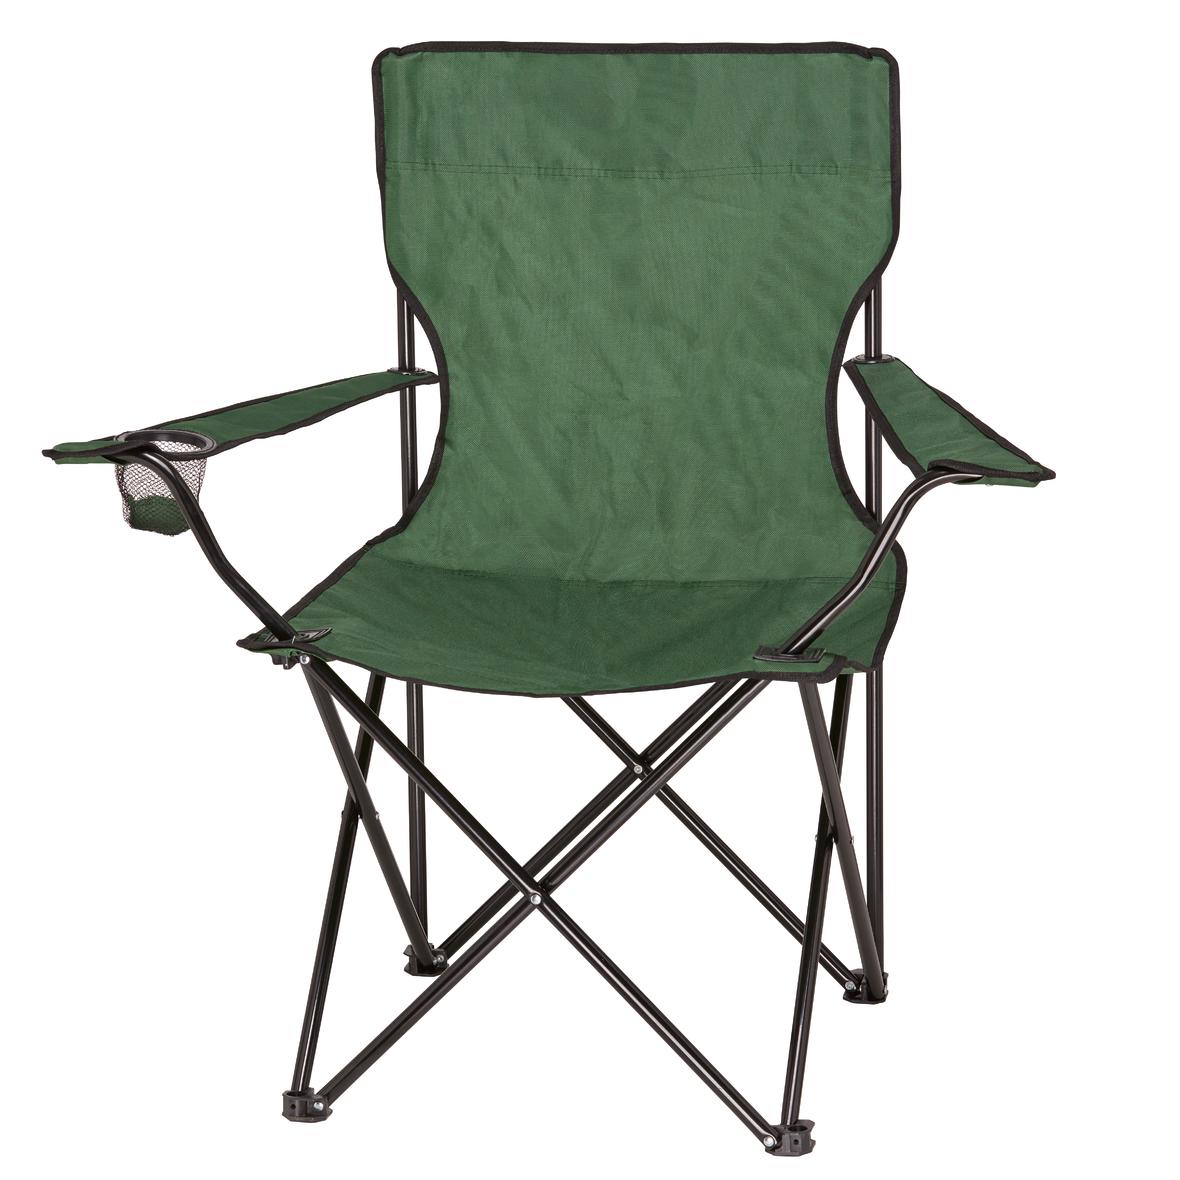 Foldable Camping Chair with Cup Holder - Rutland